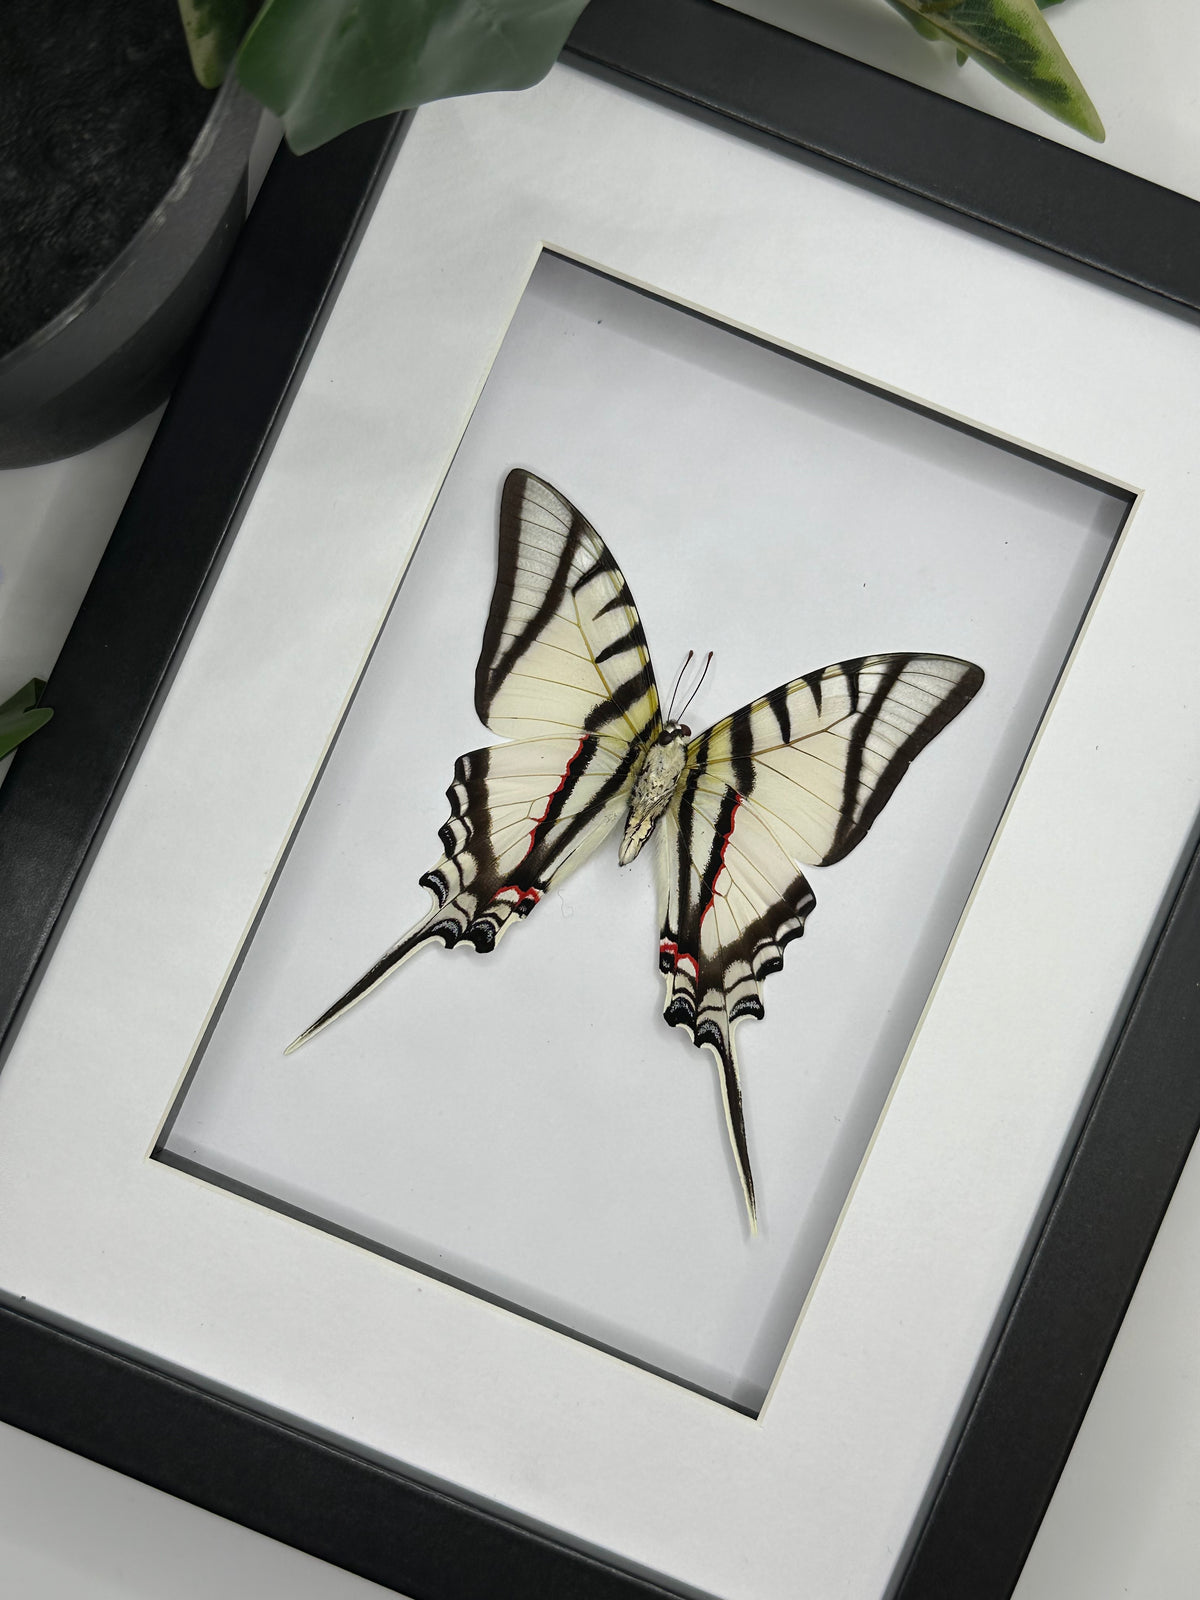 Eurytides Protesilaus Butterfly in a frame